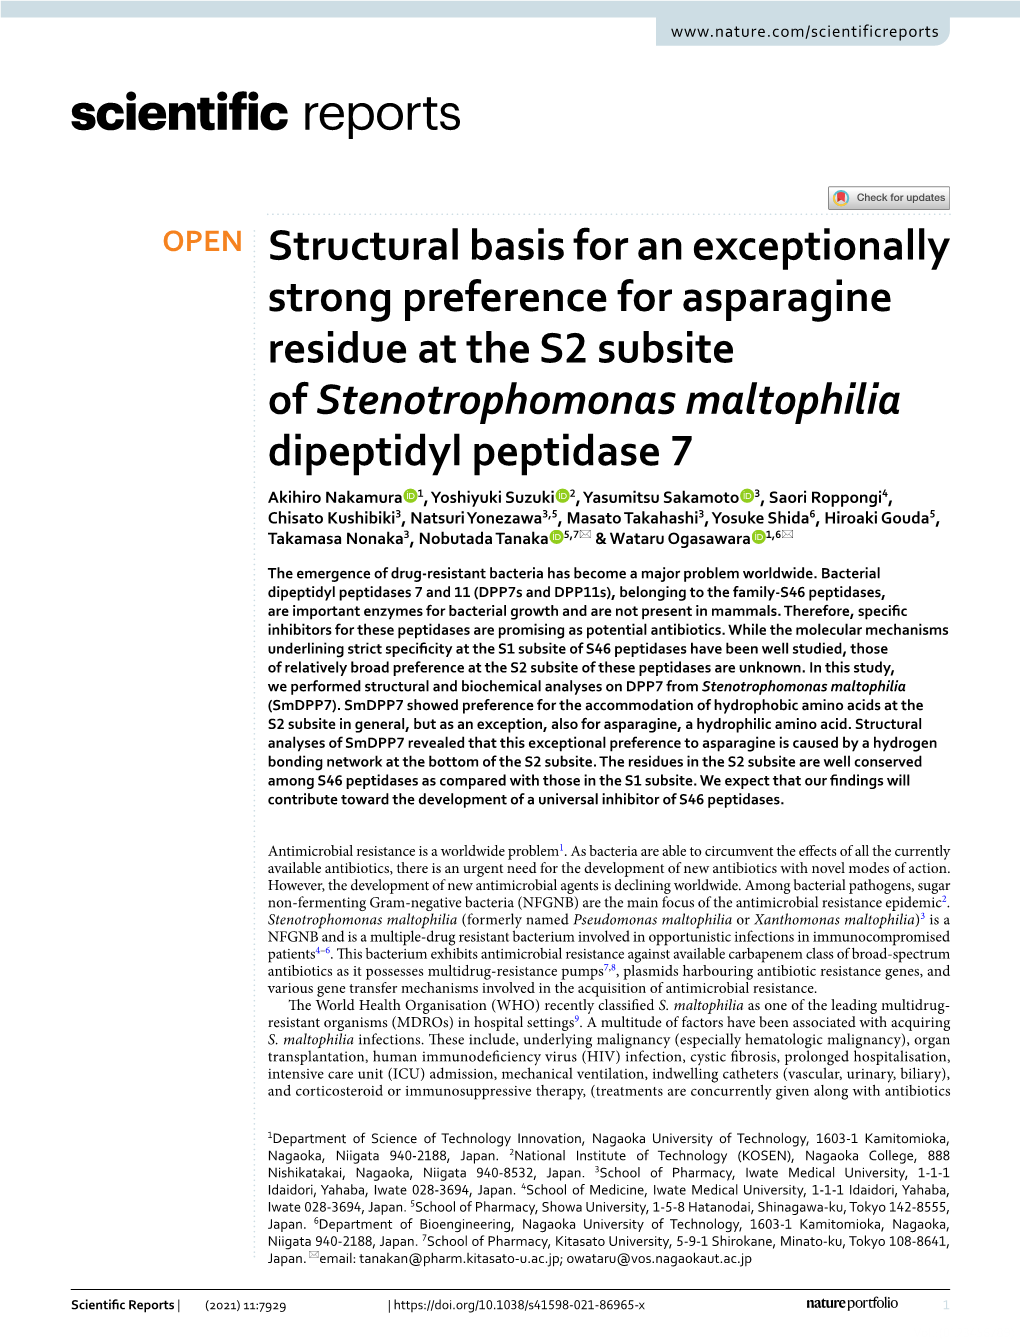 Structural Basis for an Exceptionally Strong Preference for Asparagine